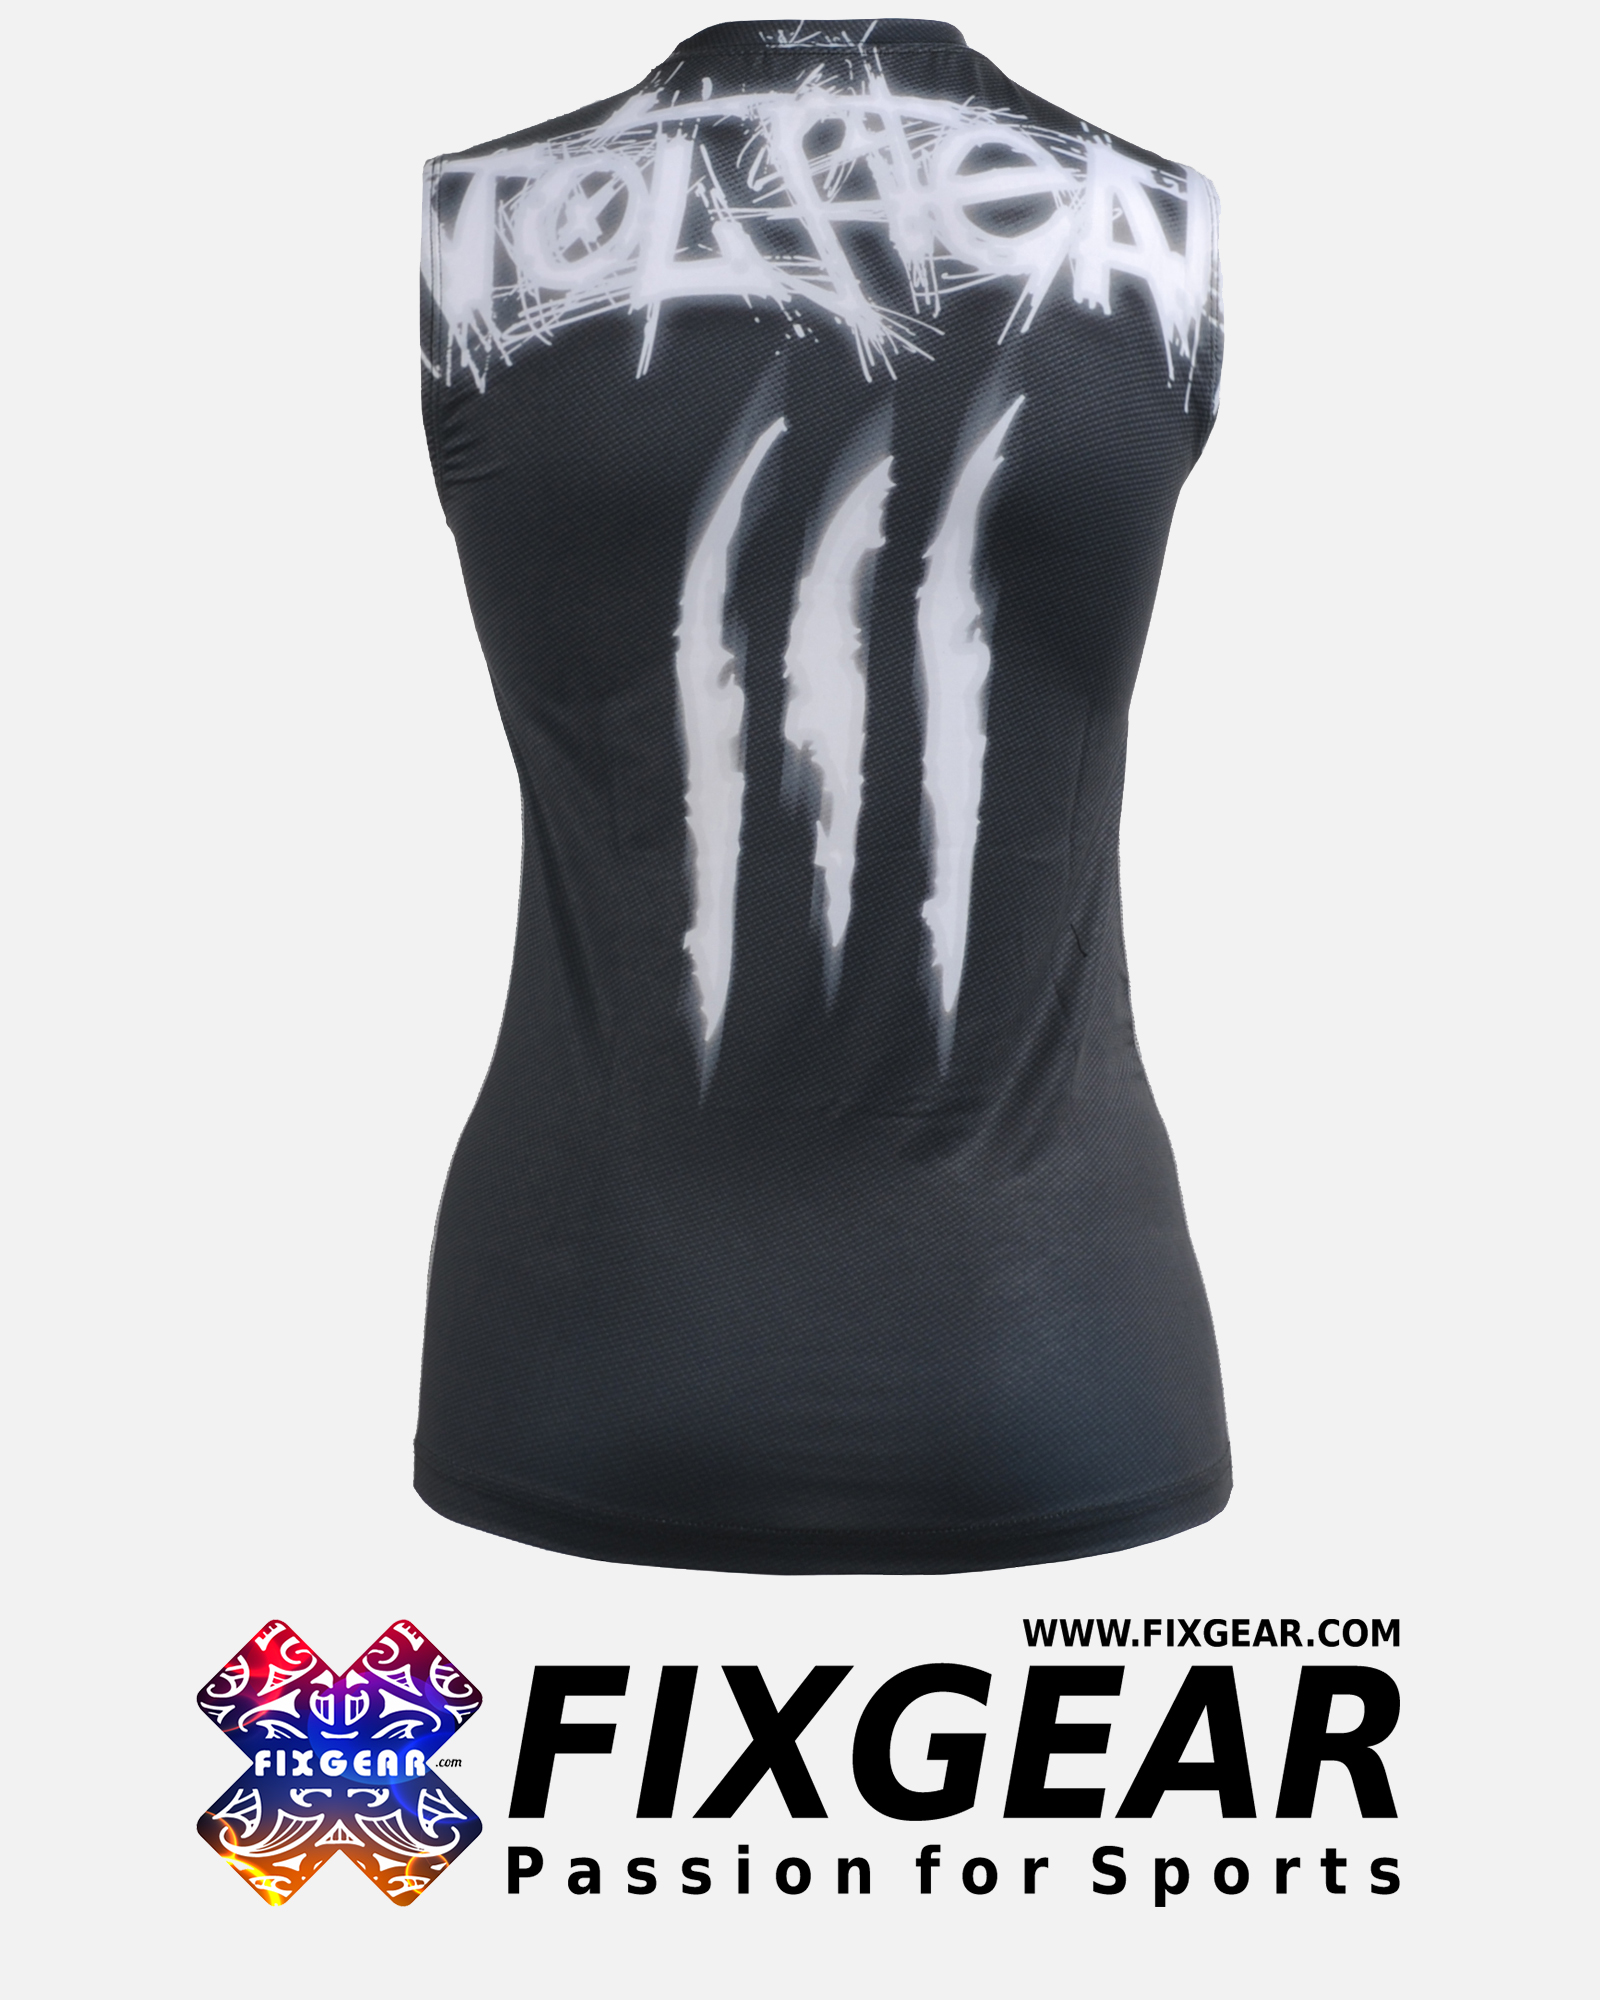 FIXGEAR CFN-H18 Compression Sleeveless Muscle Shirt Featuring Crew Neckline 